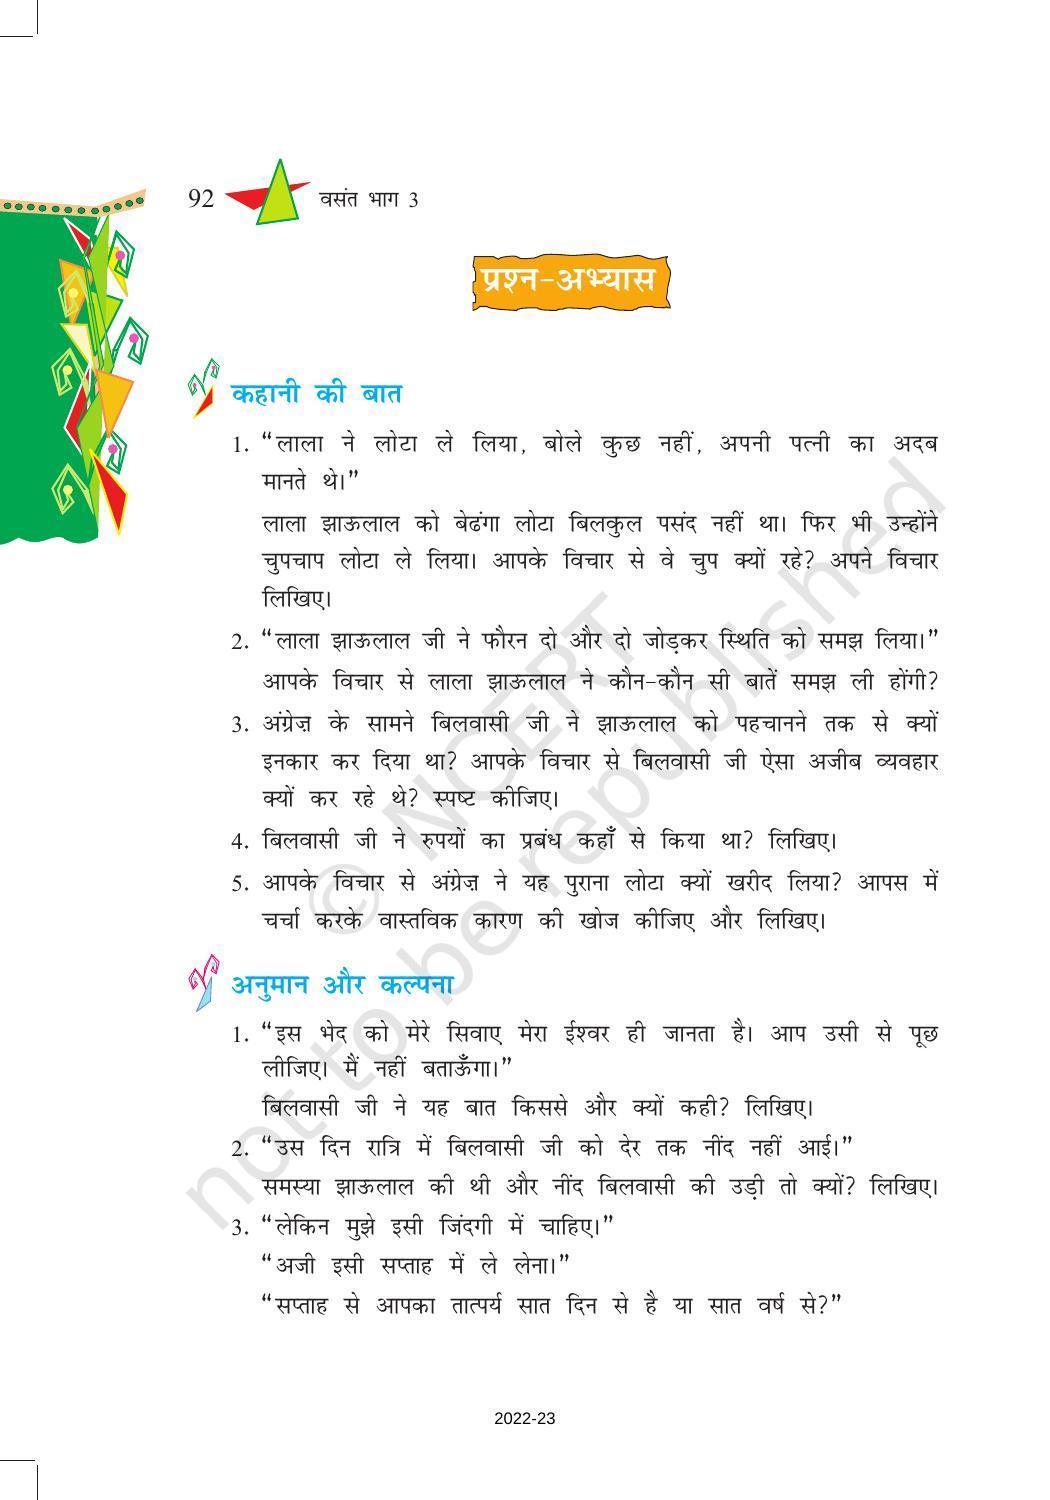 NCERT Book for Class 8 Hindi Vasant Chapter 14 अकबरी लोटा - Page 10